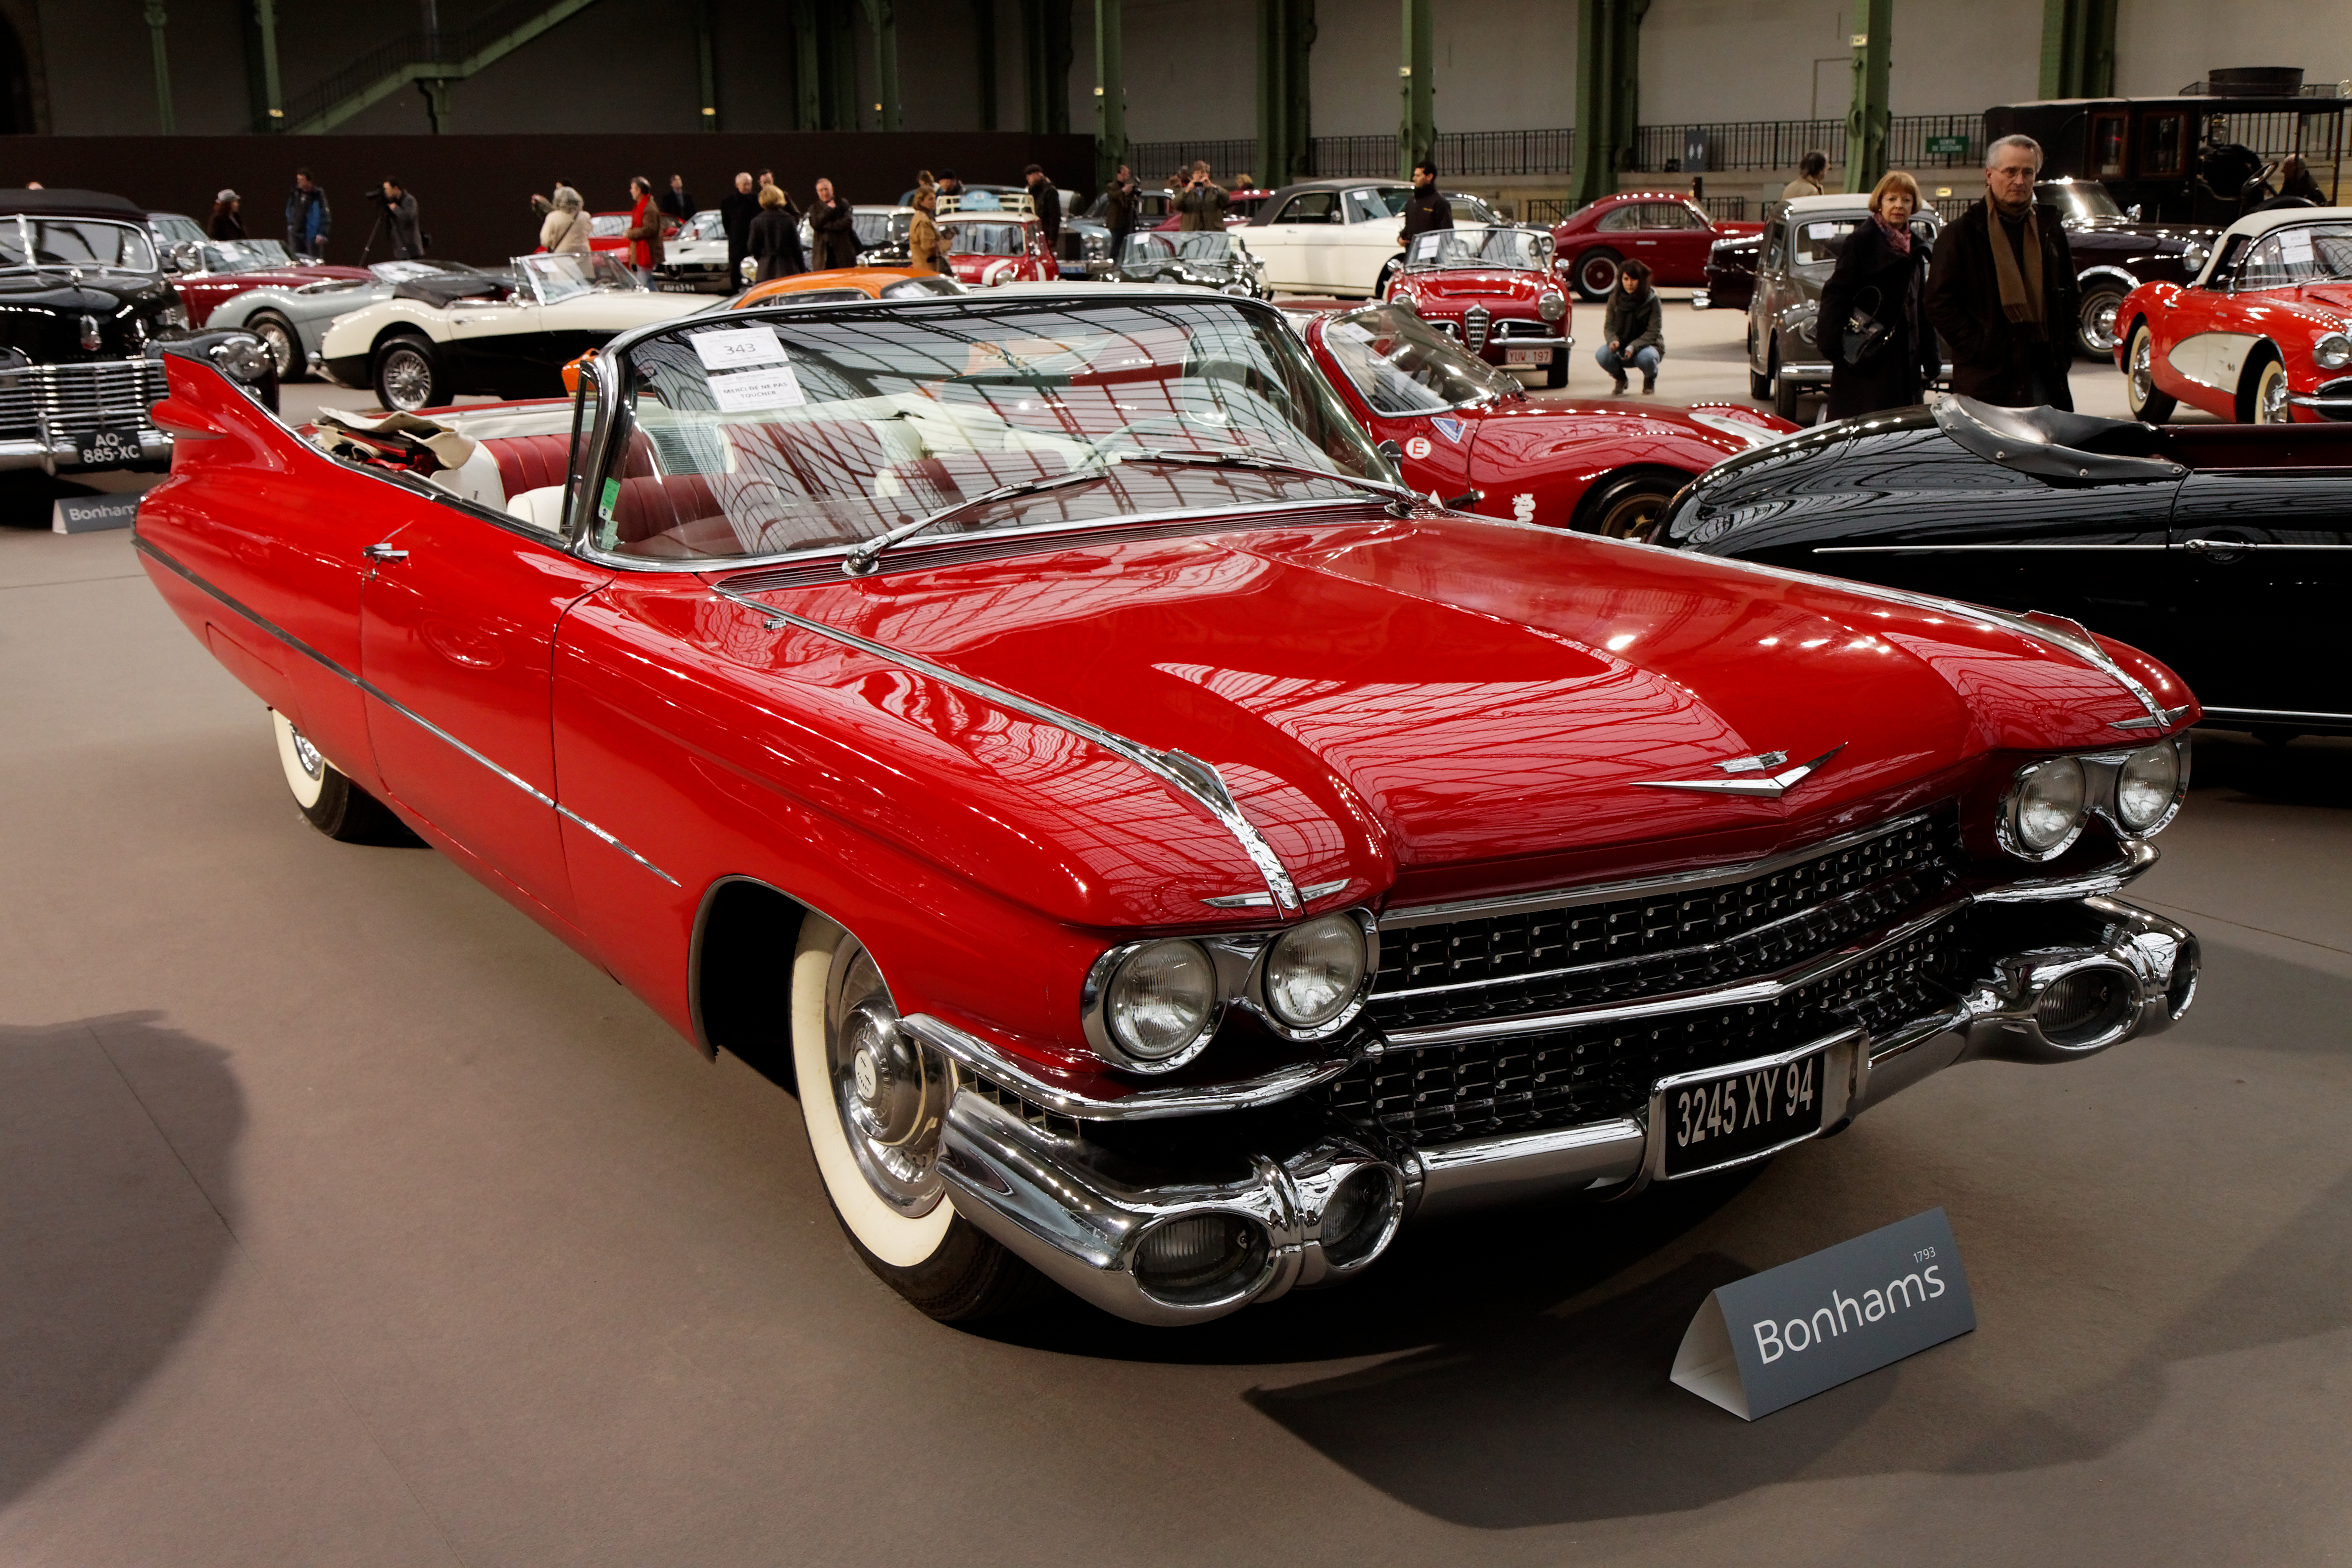 Cadillac Series 62 Pics, Vehicles Collection